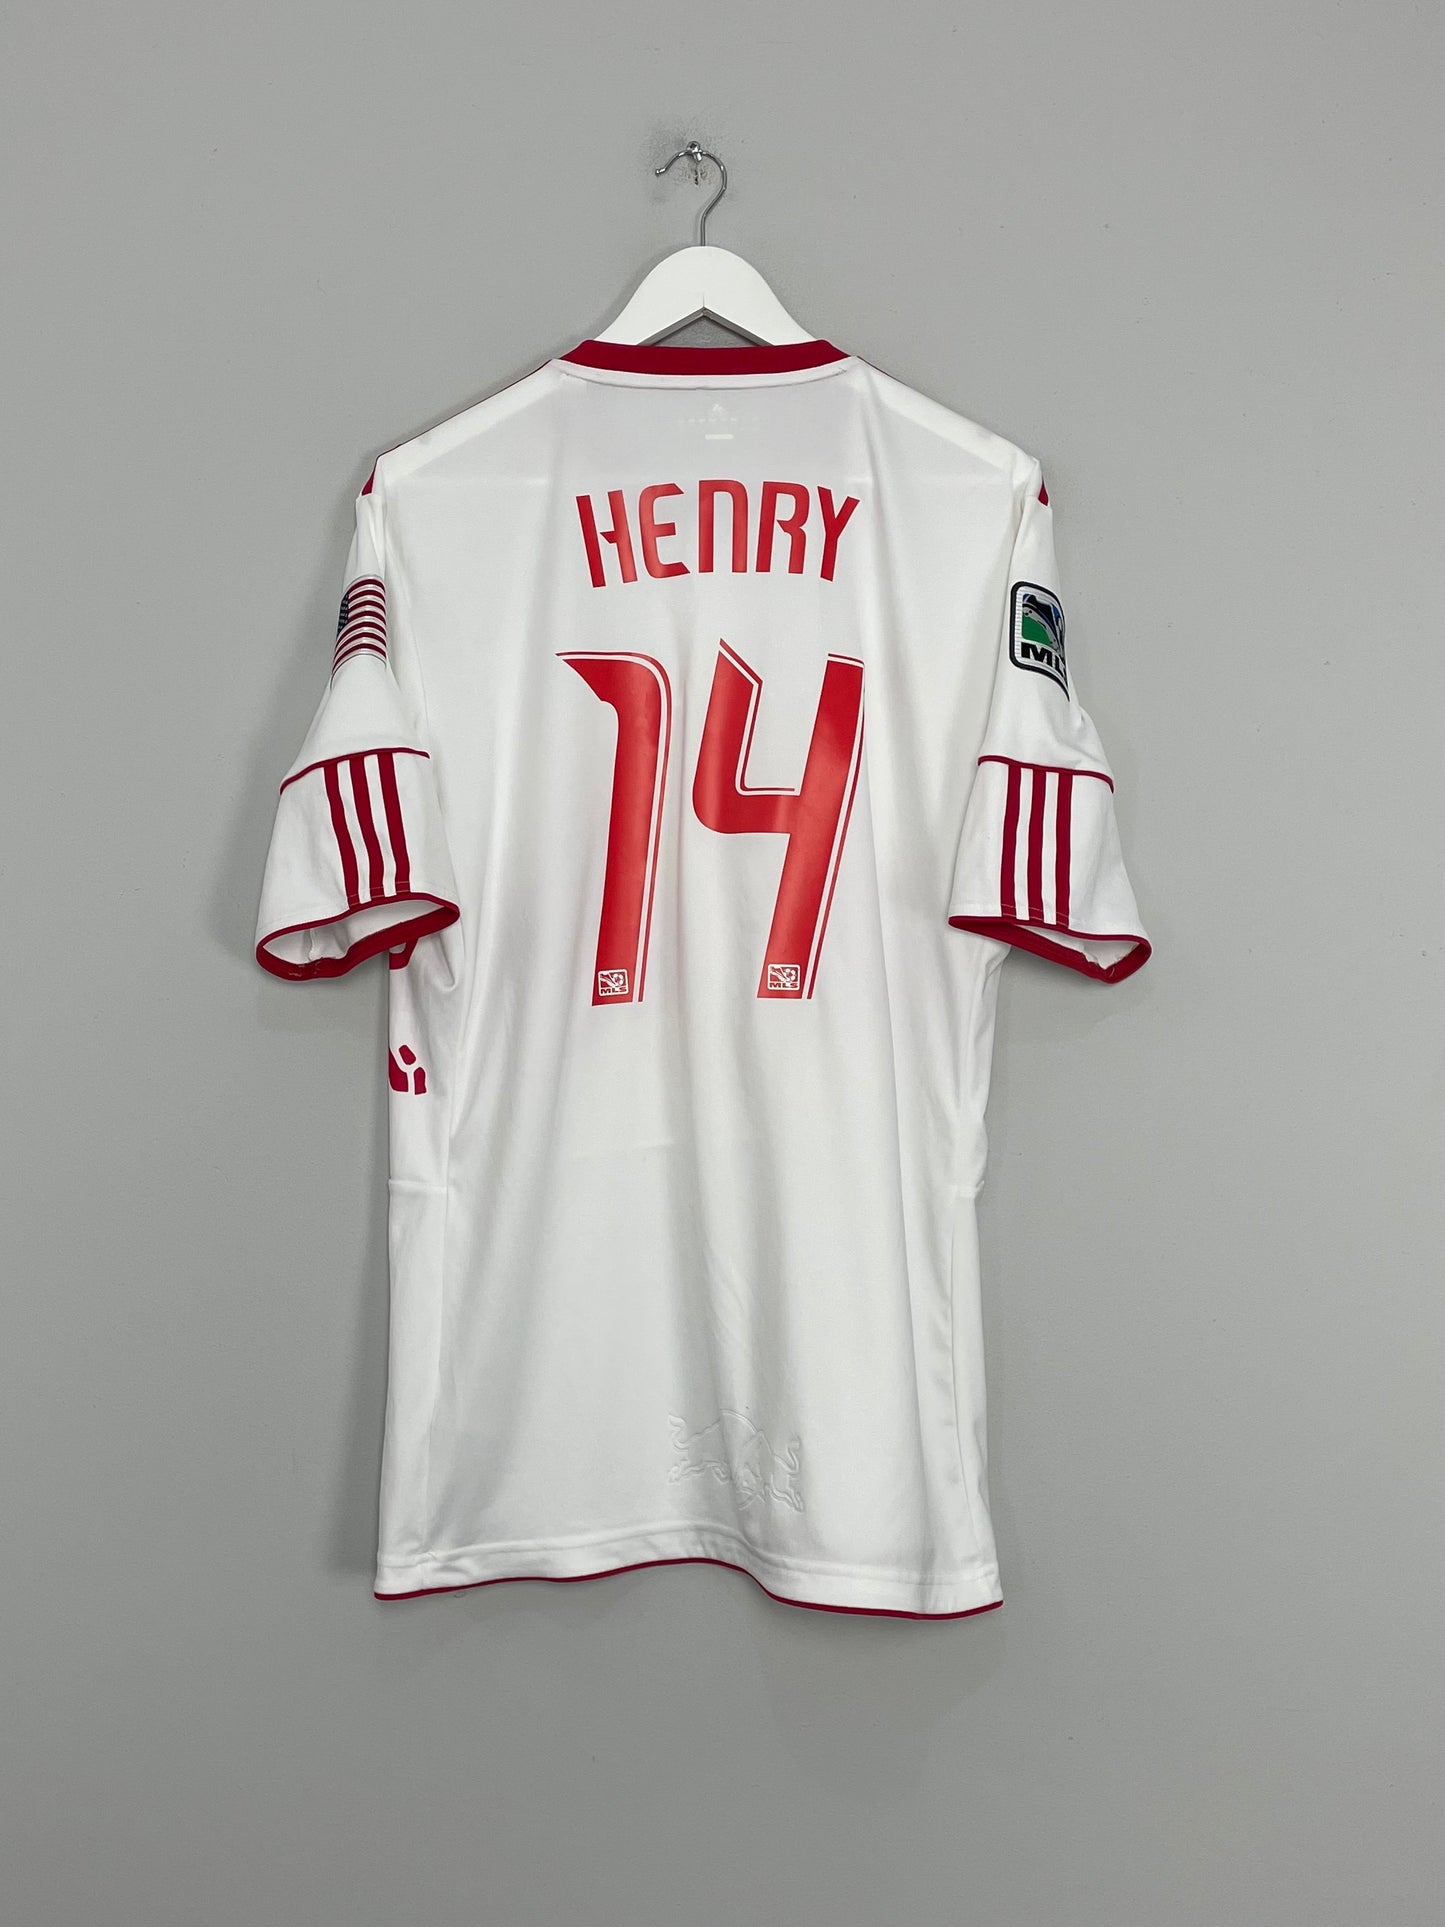 Image of the New York Red Bulls Henry shirt from the 2010/11 season